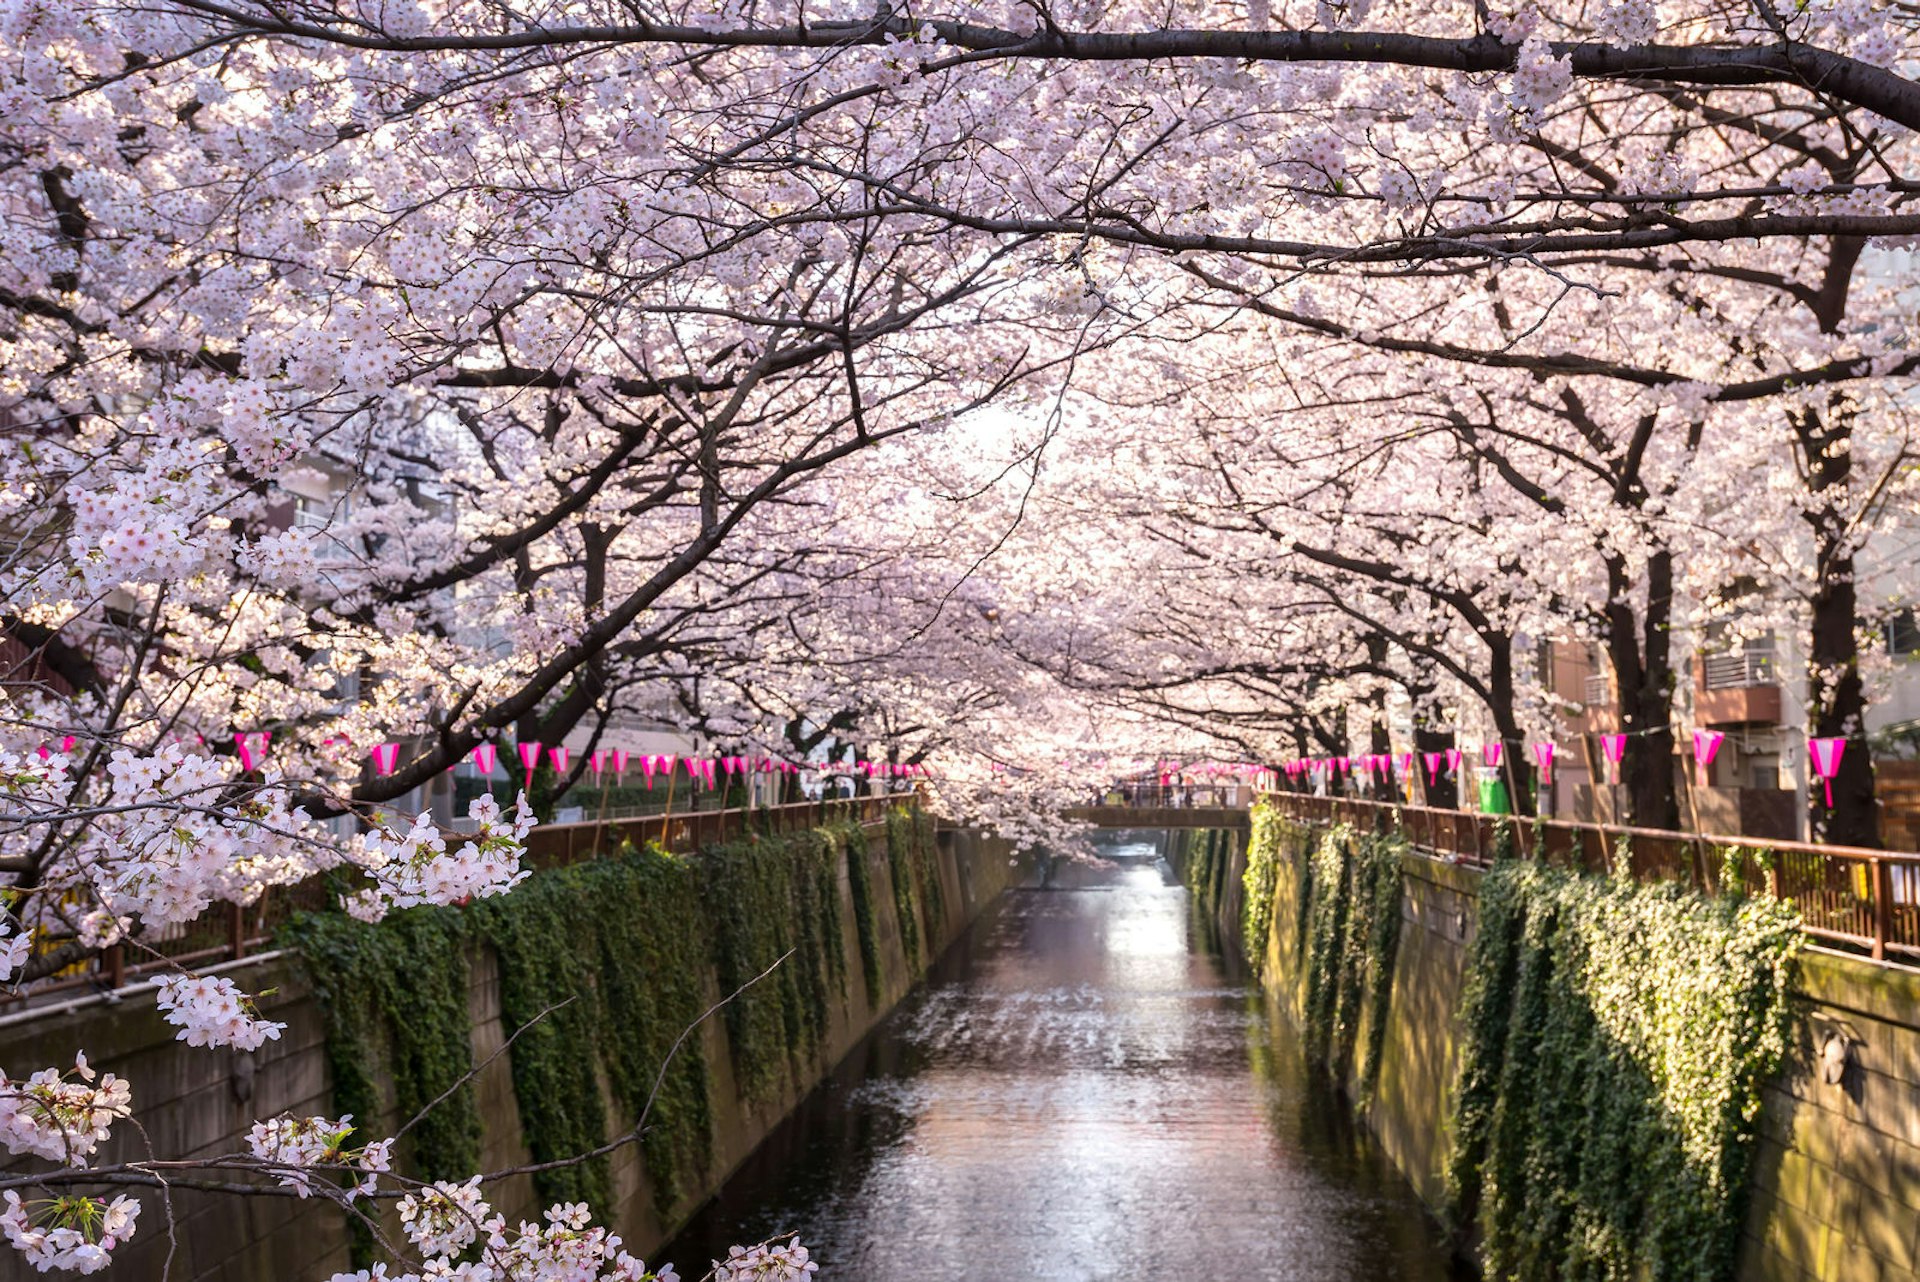 A mirror-still, straight canal in Tokyo, Japan, above which is an archway of tree branches which are heavy with spring cherry blossom